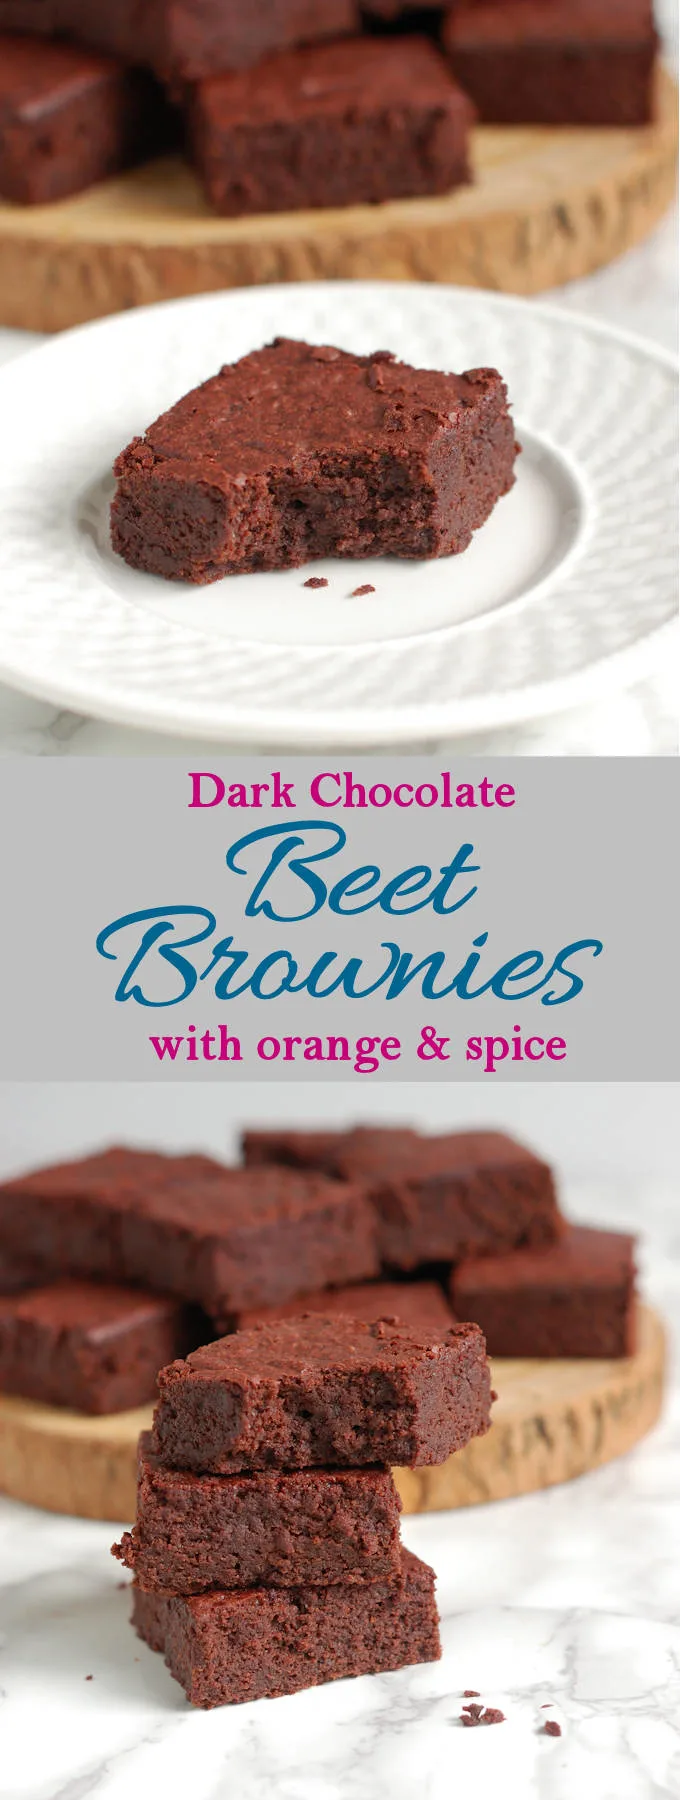 Roasted red beets make these brownies super moist with a special flavor. A little orange and spice are the perfect compliments to the beet flavor.